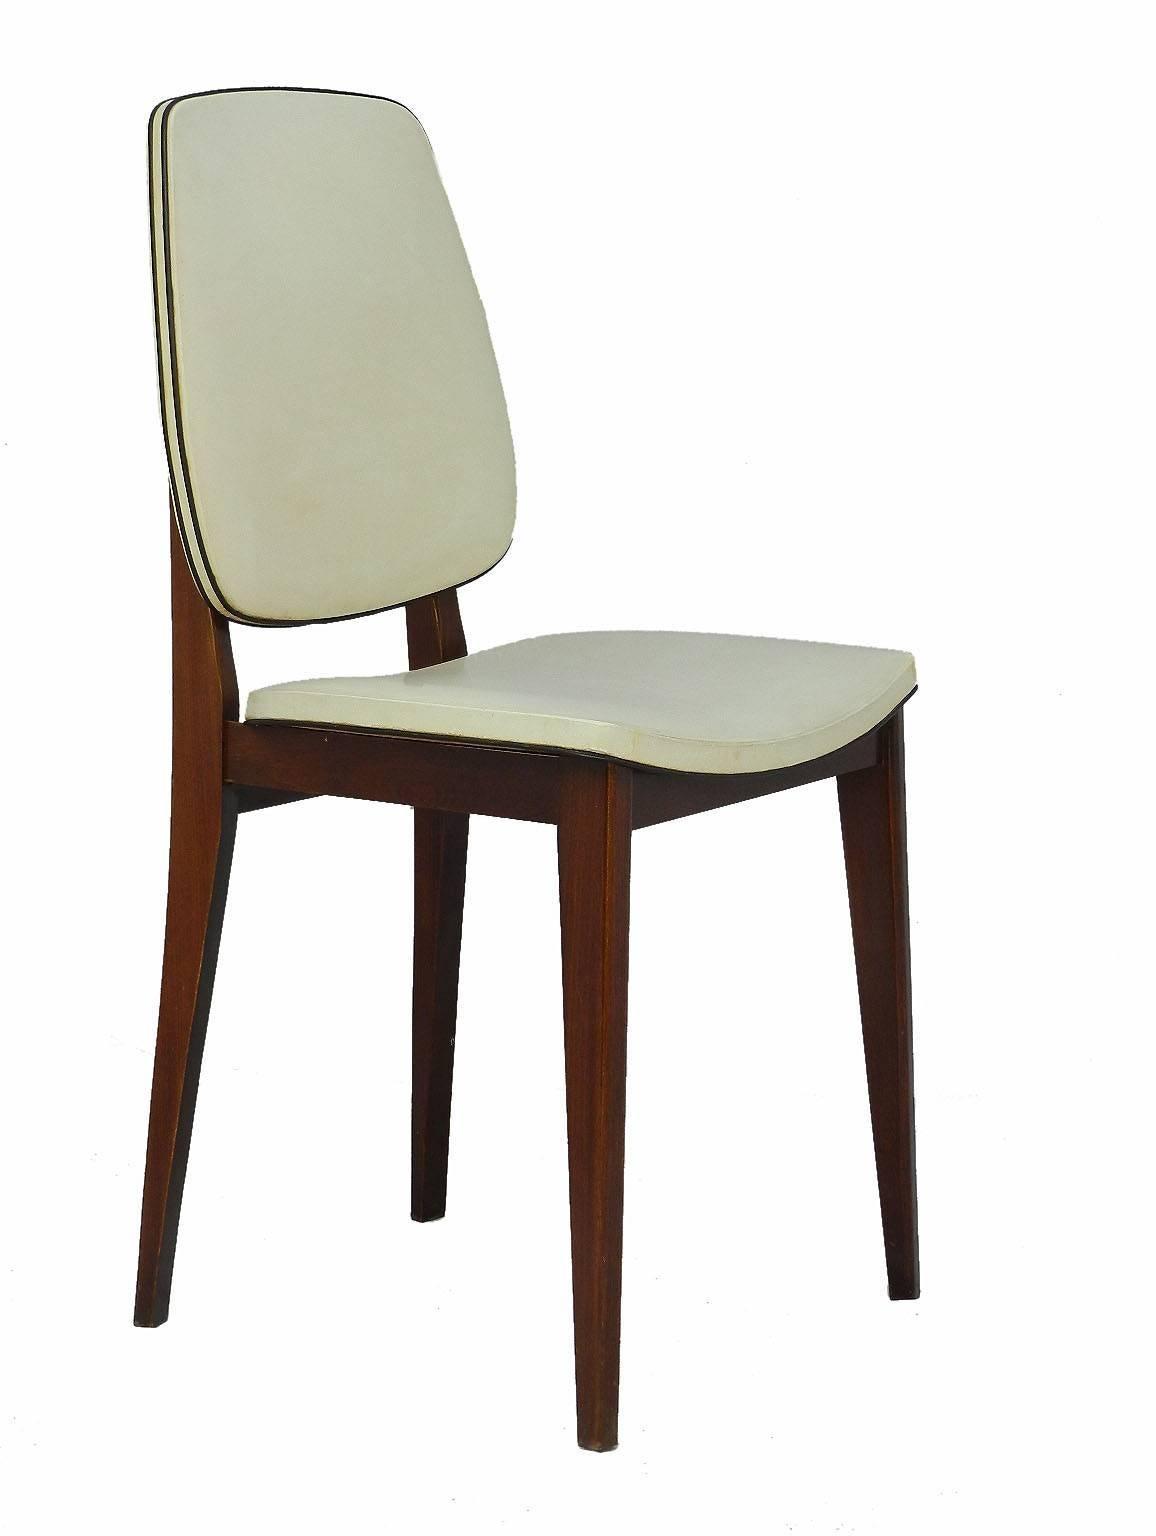 Set of six Mid-Century dining chairs
French vintage, circa 1960-1970
Original vinyl covers with black piping
Polished wood legs
Very good condition sound and solid one chair has a couple of very small marks of use to the back not distracting